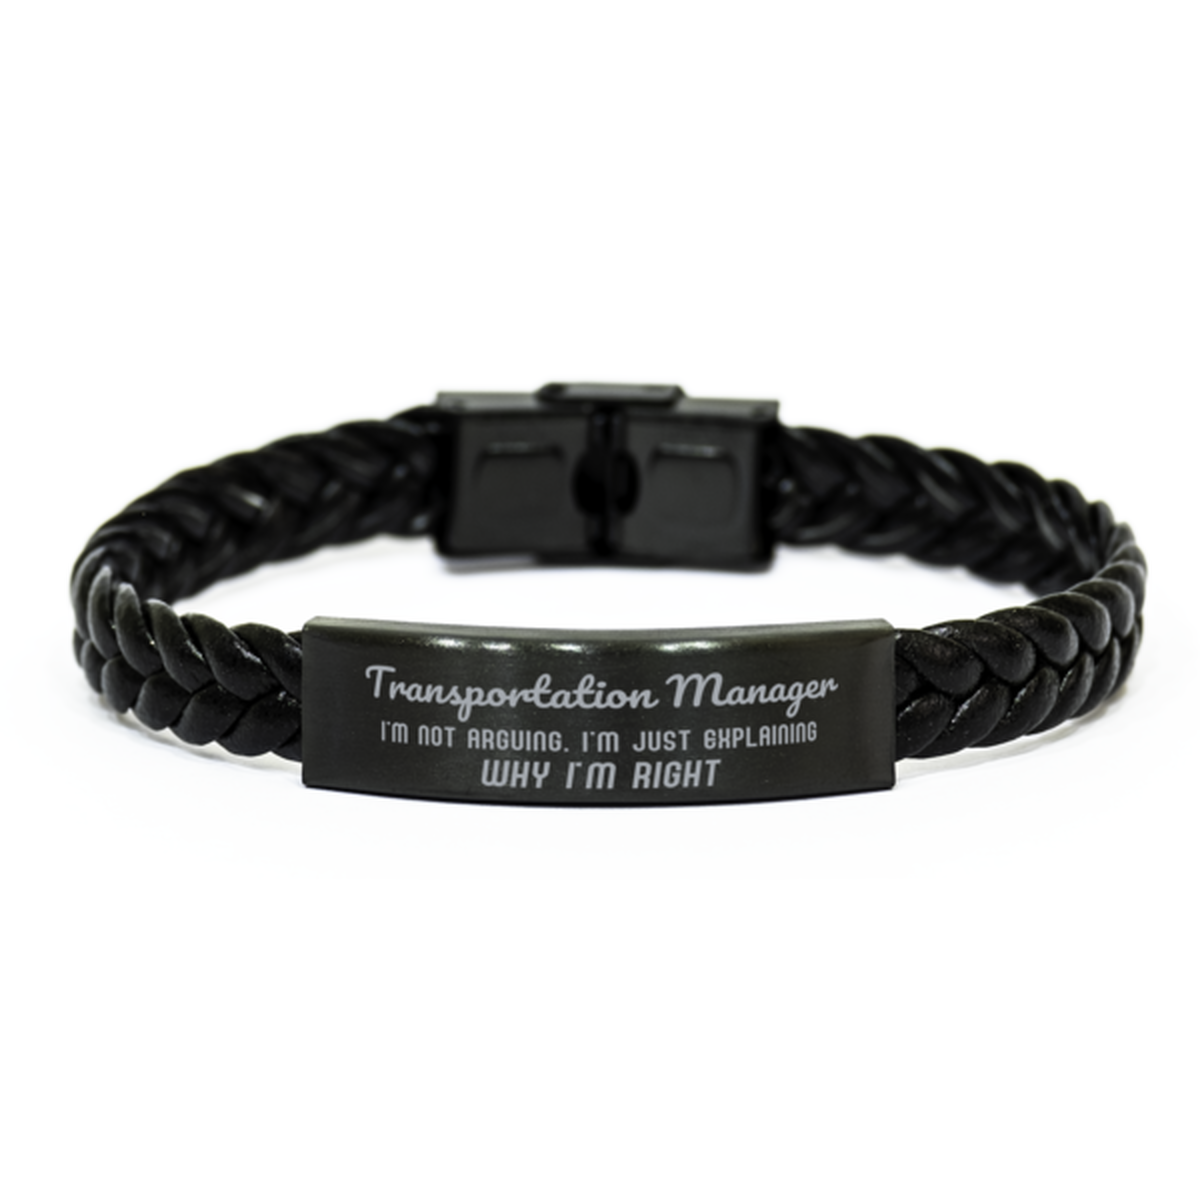 Transportation Manager I'm not Arguing. I'm Just Explaining Why I'm RIGHT Braided Leather Bracelet, Graduation Birthday Christmas Transportation Manager Gifts For Transportation Manager Funny Saying Quote Present for Men Women Coworker